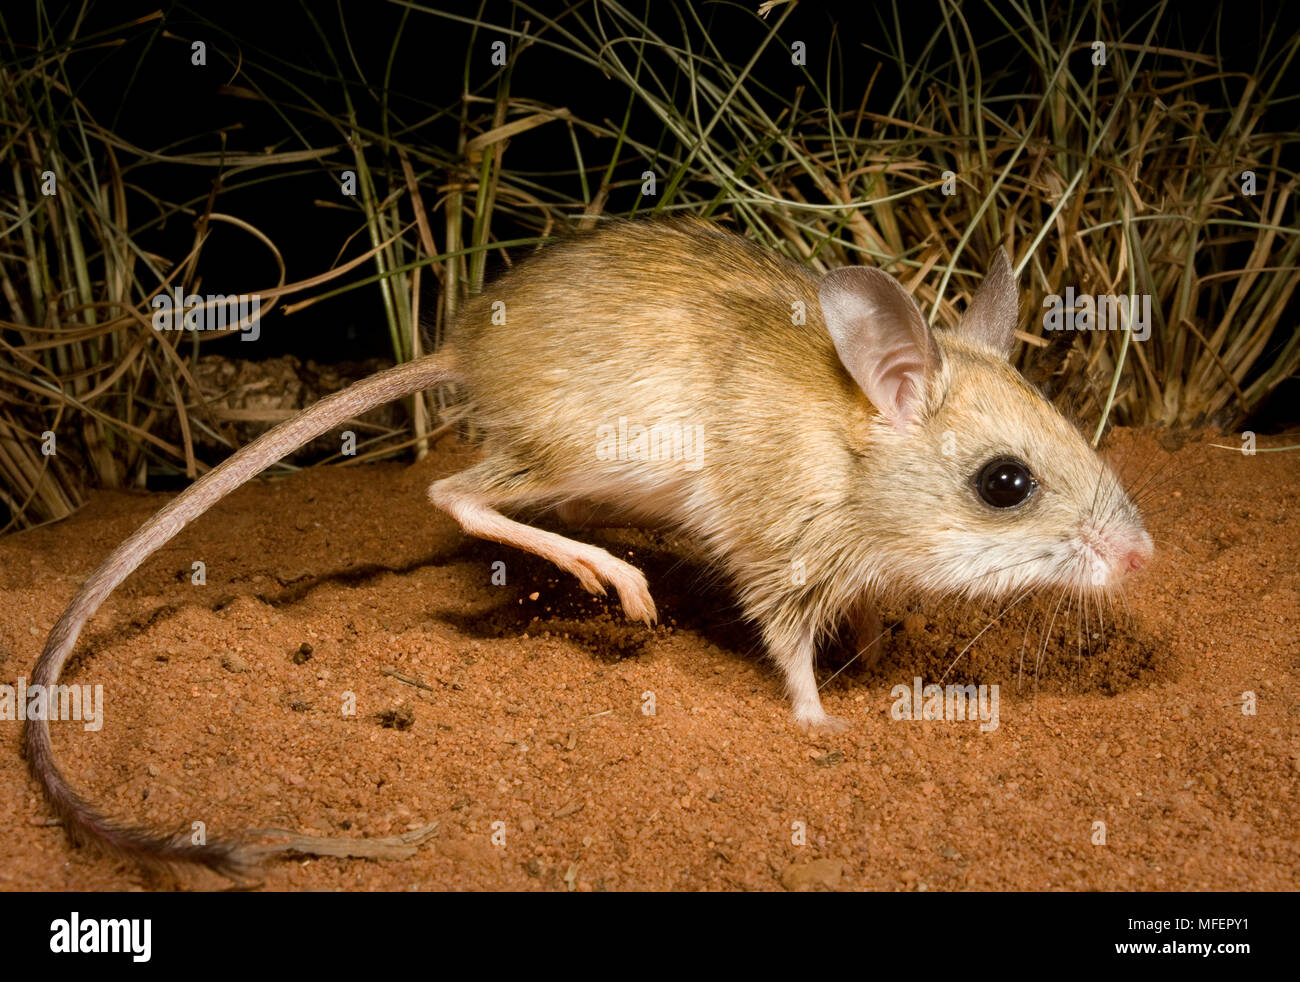 Spinifex Hopping Mouse (Notomys alexis), Fam. Muridae, Rodentia, One of the most desert adapted mammals with a record rate of urine concentration, Ani Stock Photo